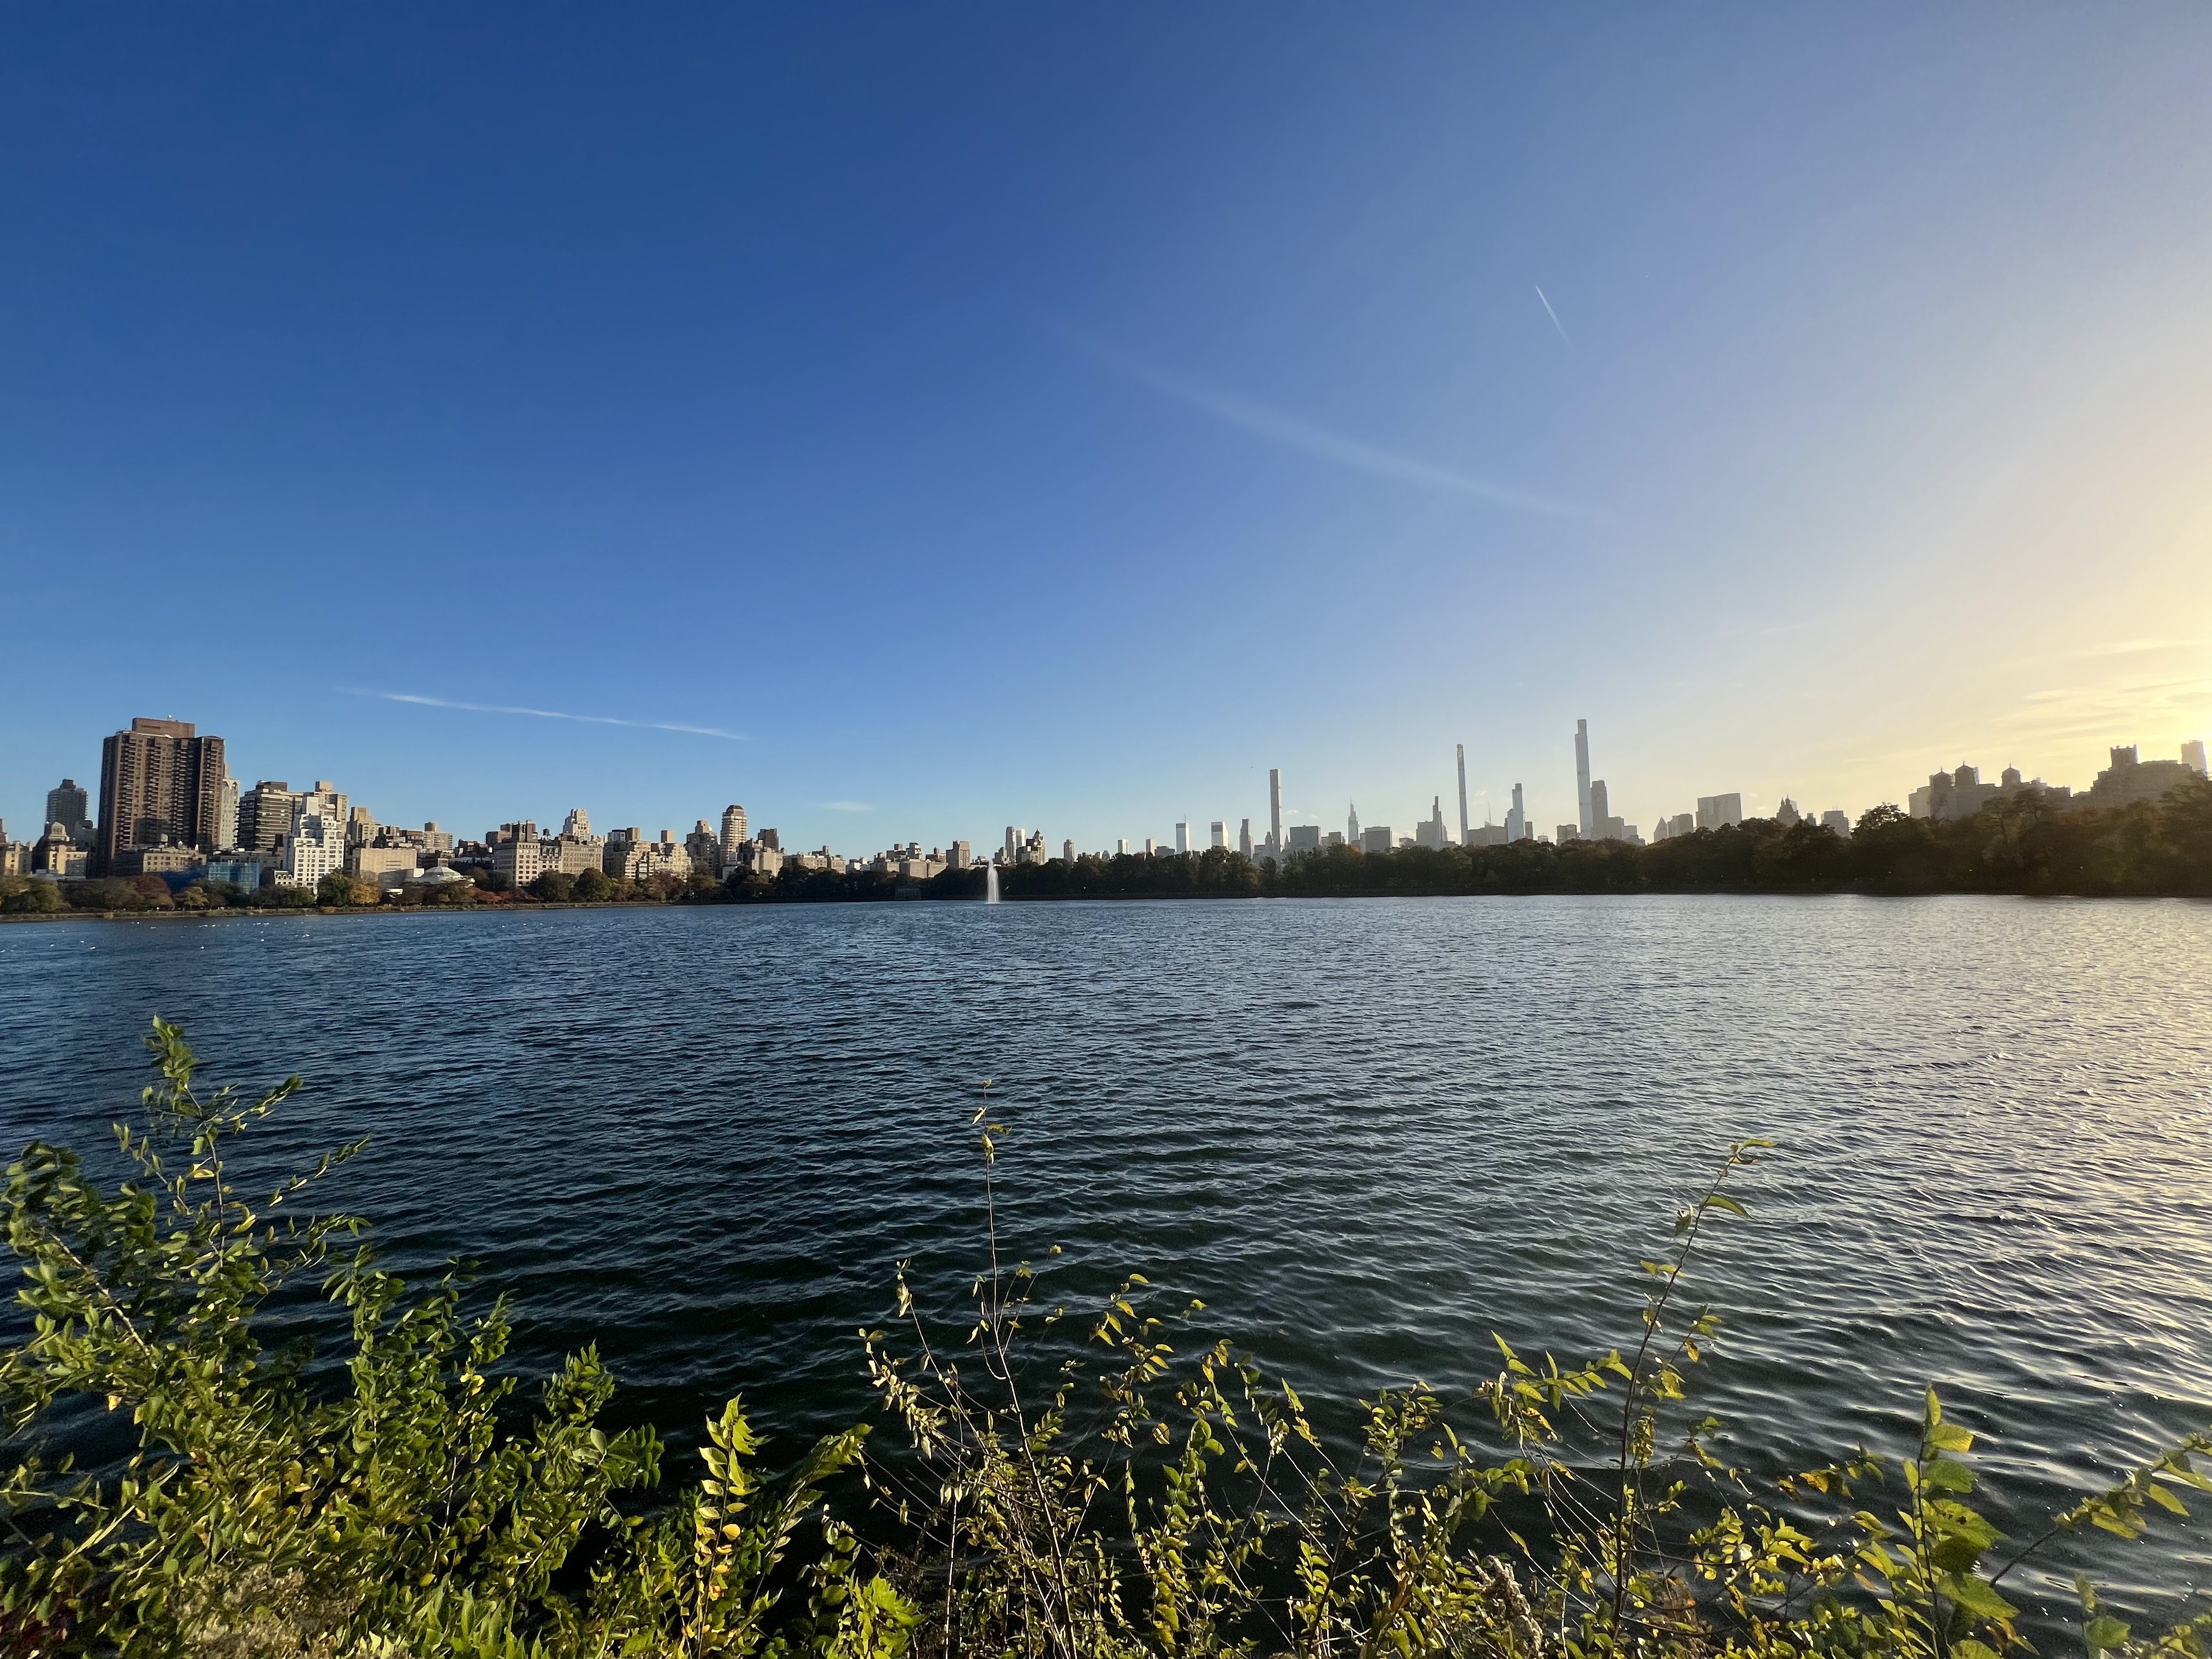 central park, walking tour, manhattan from north to south, historical spots in nyc, nyc travel guide